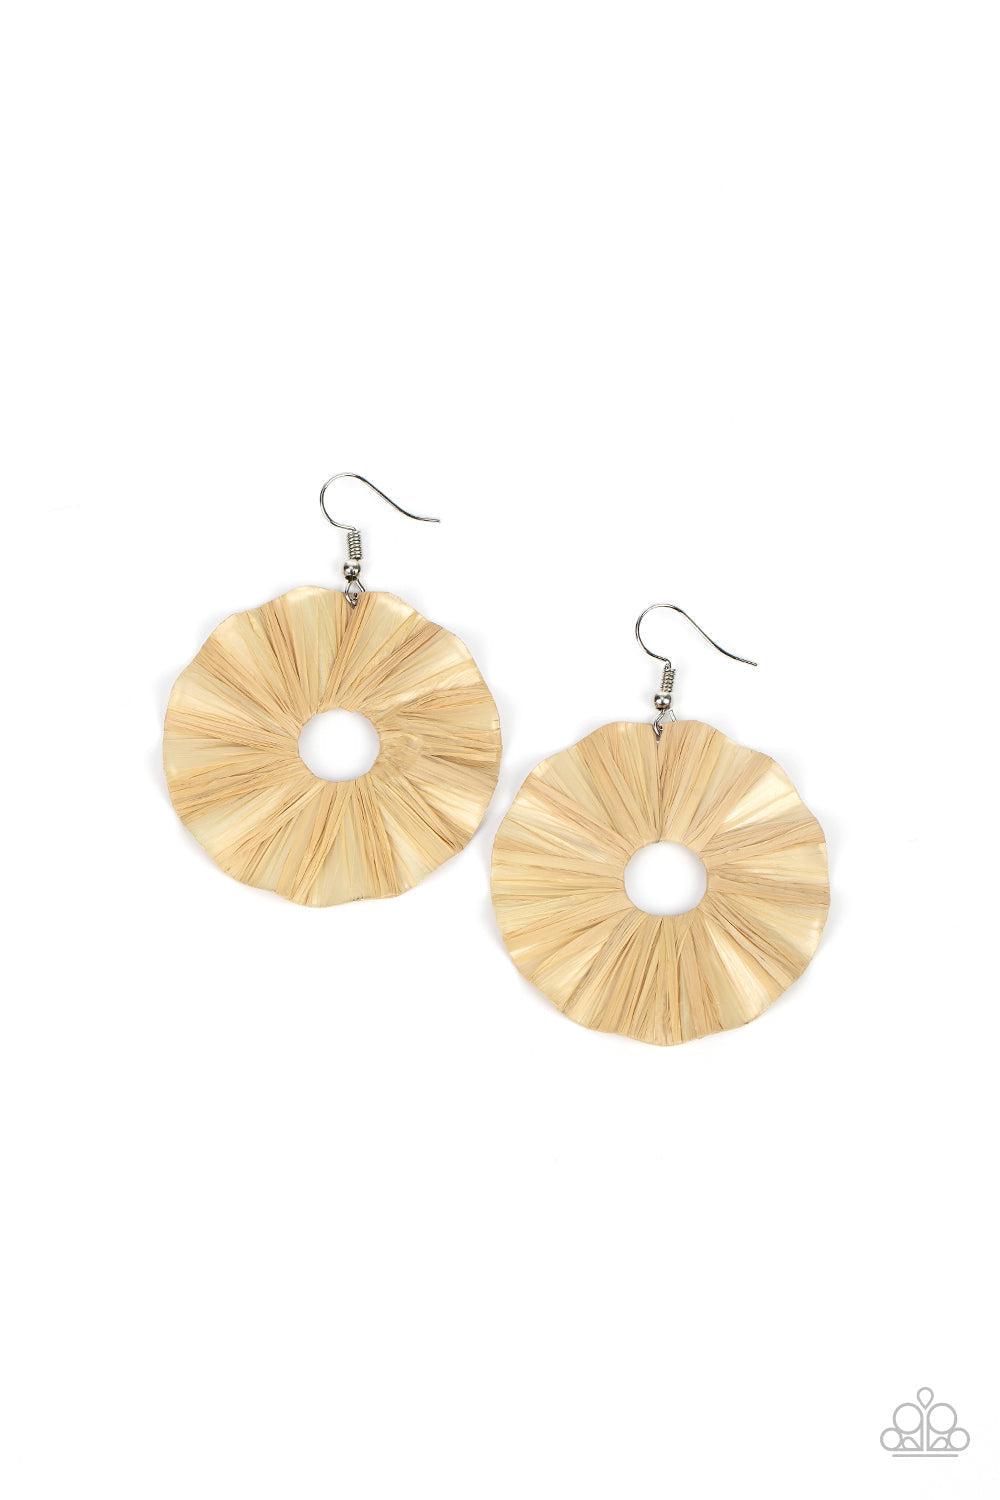 Fan The Breeze Brown Earrings - Paparazzi Accessories- lightbox - CarasShop.com - $5 Jewelry by Cara Jewels